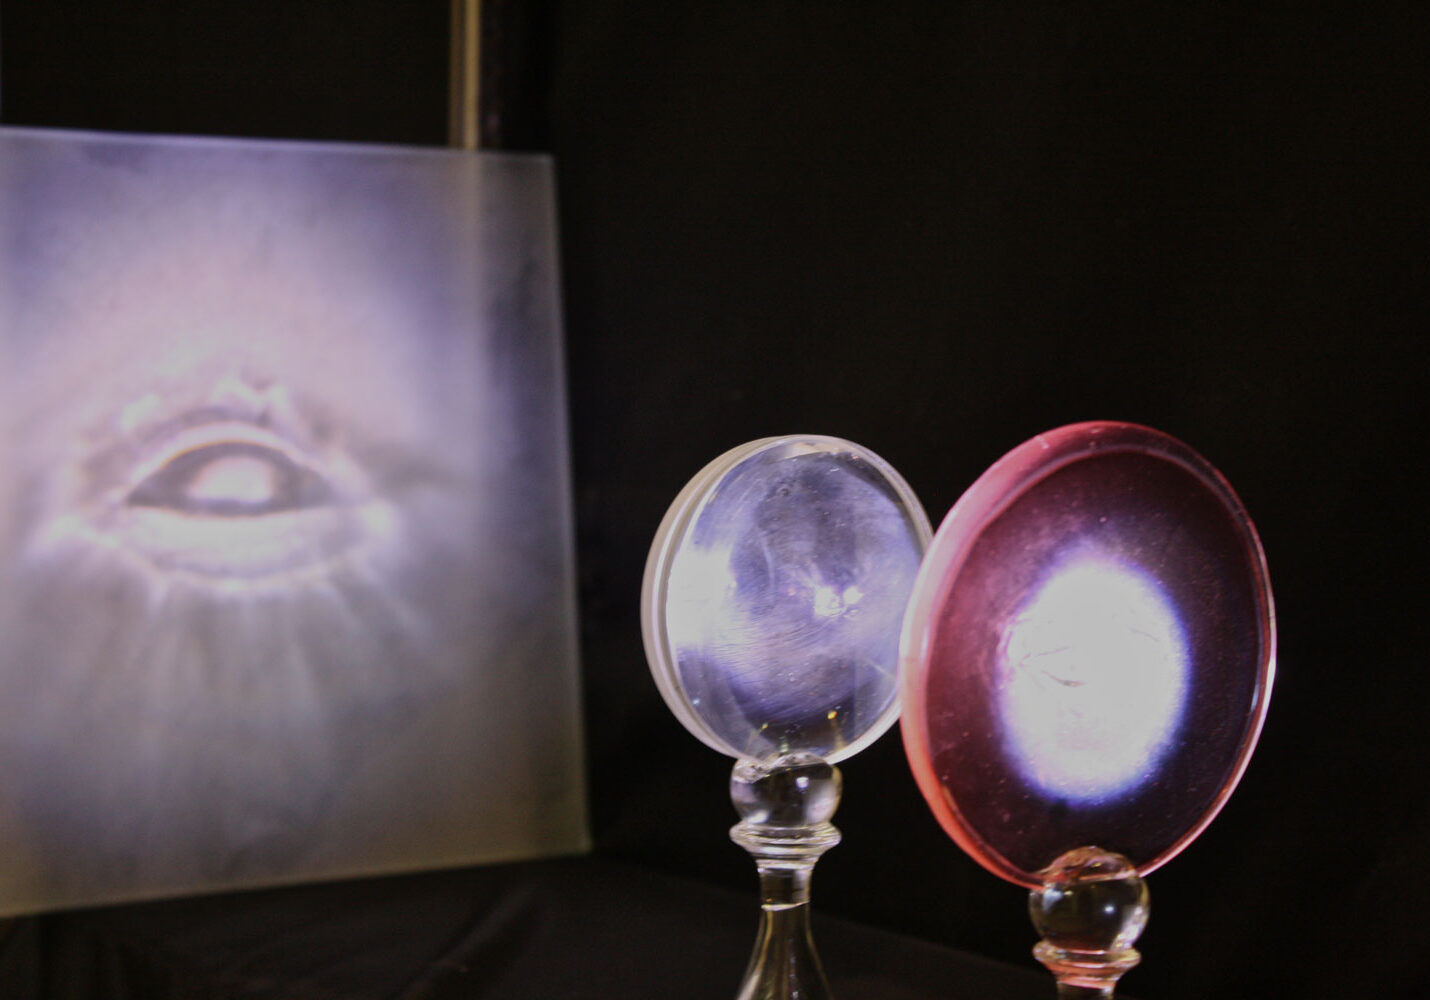 An image of a magic lantern show performed at Providence Public Library